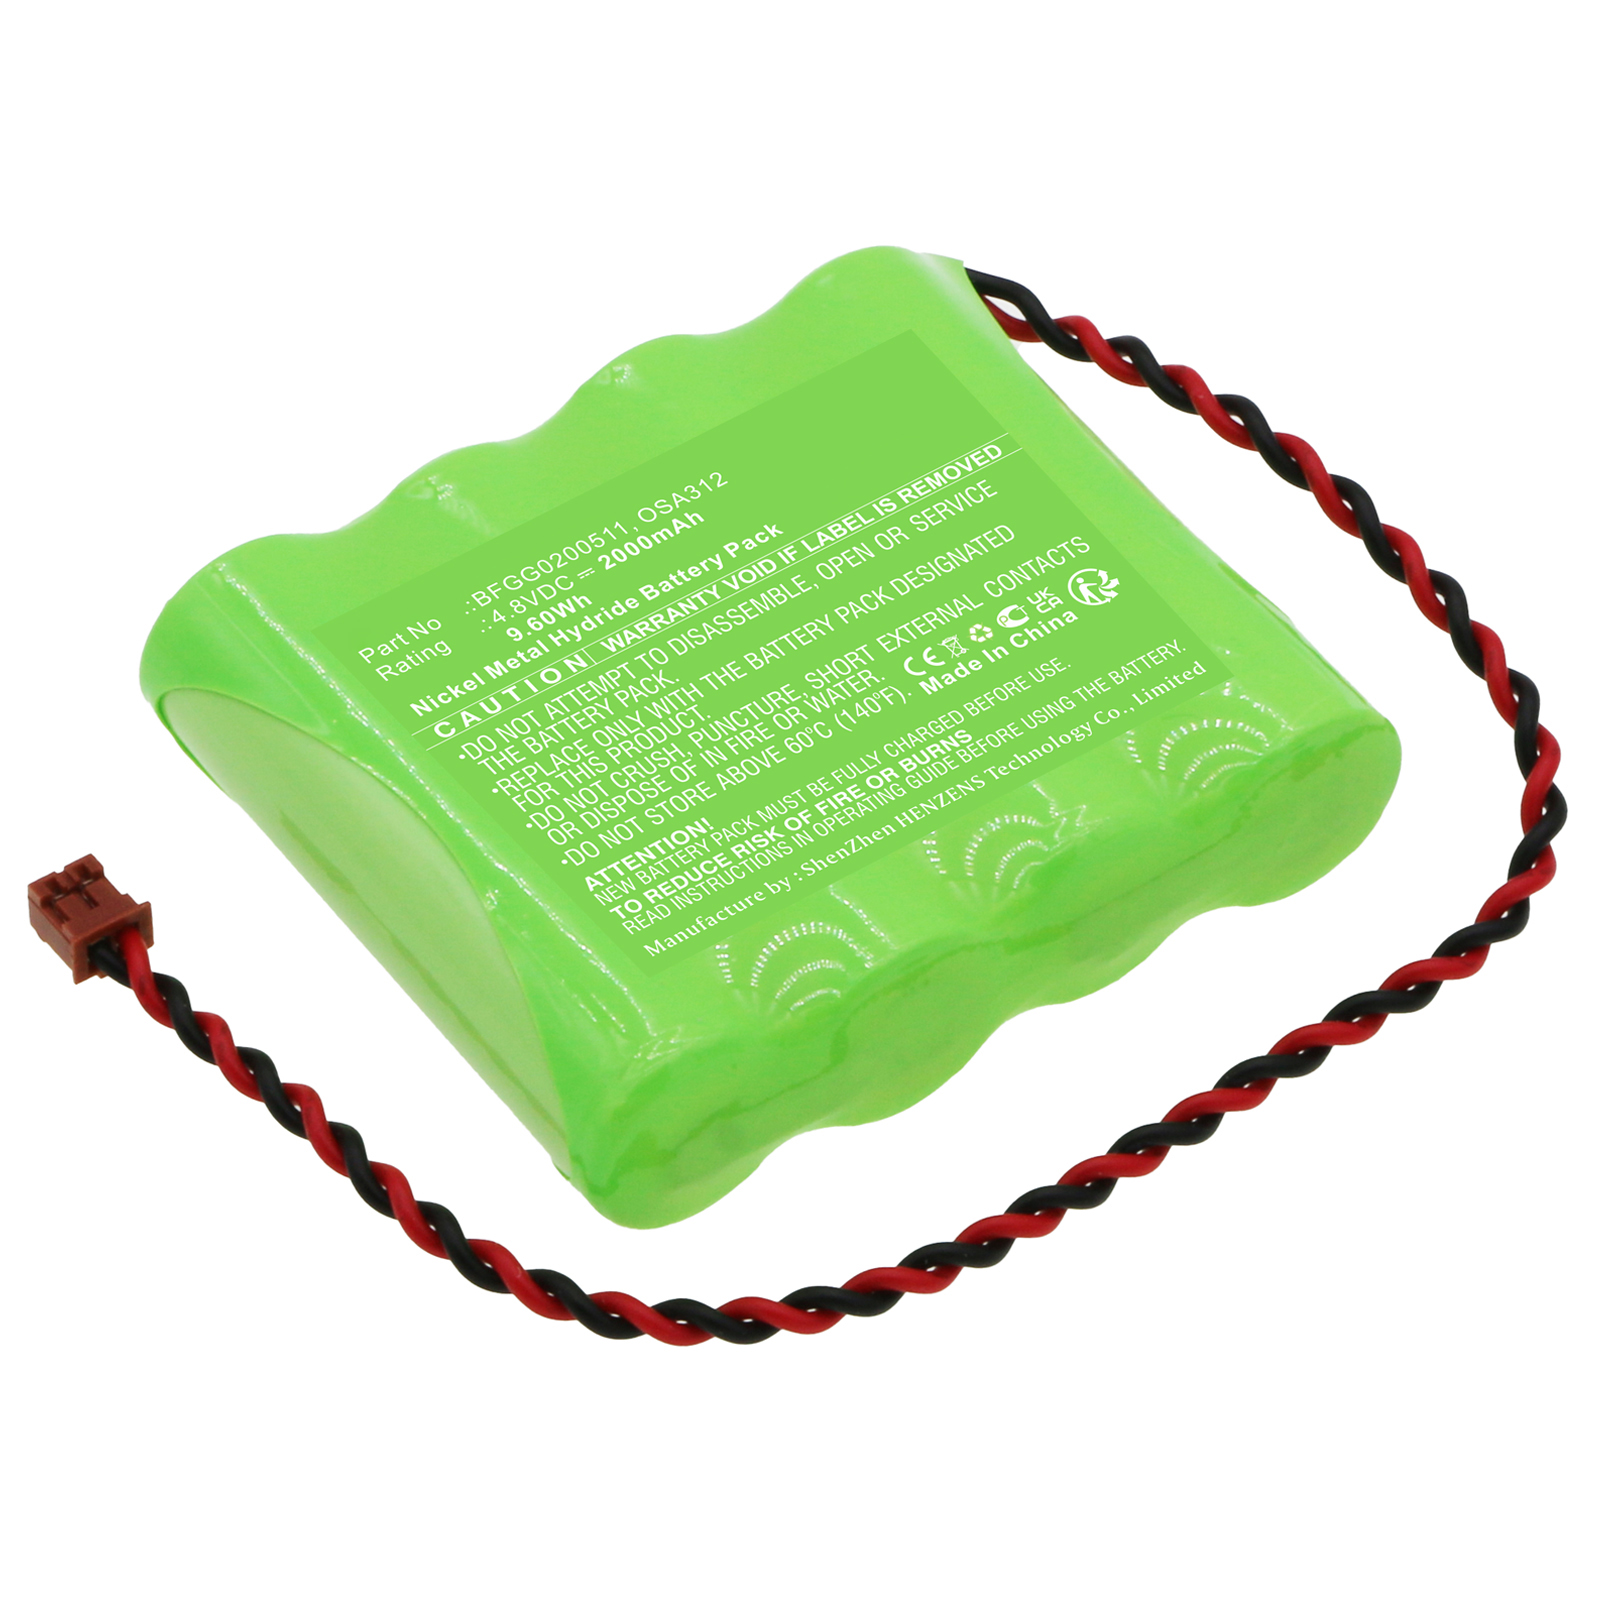 Synergy Digital Equipment Battery, Compatible with Shimpo OSA312 Equipment Battery (Ni-MH, 4.8V, 2000mAh)